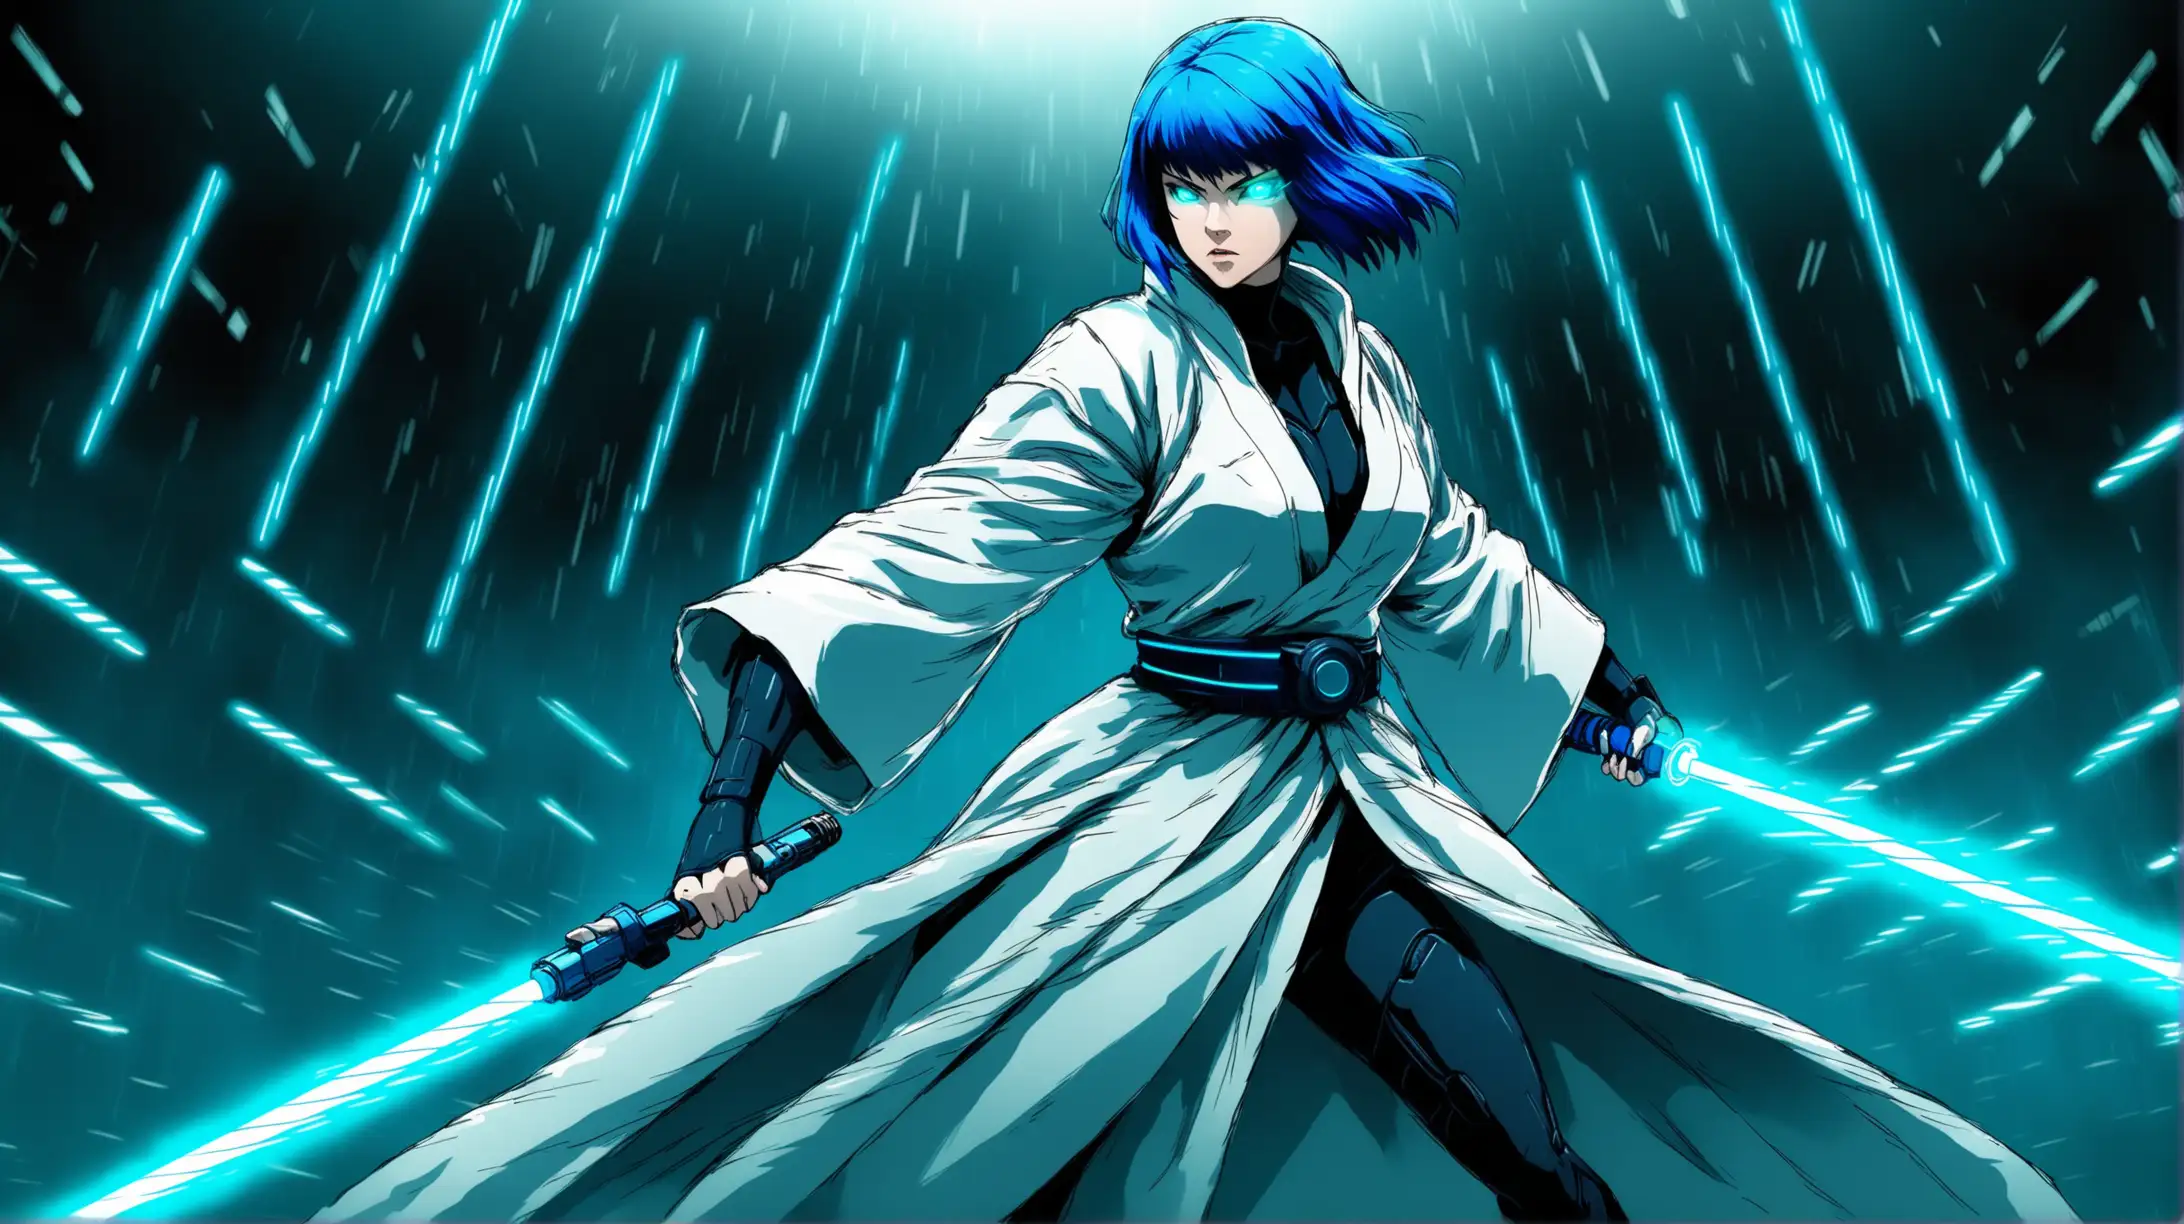 female with neon blue hair holding a lightsaber- with robes in battle stance - ghost in the shell style
